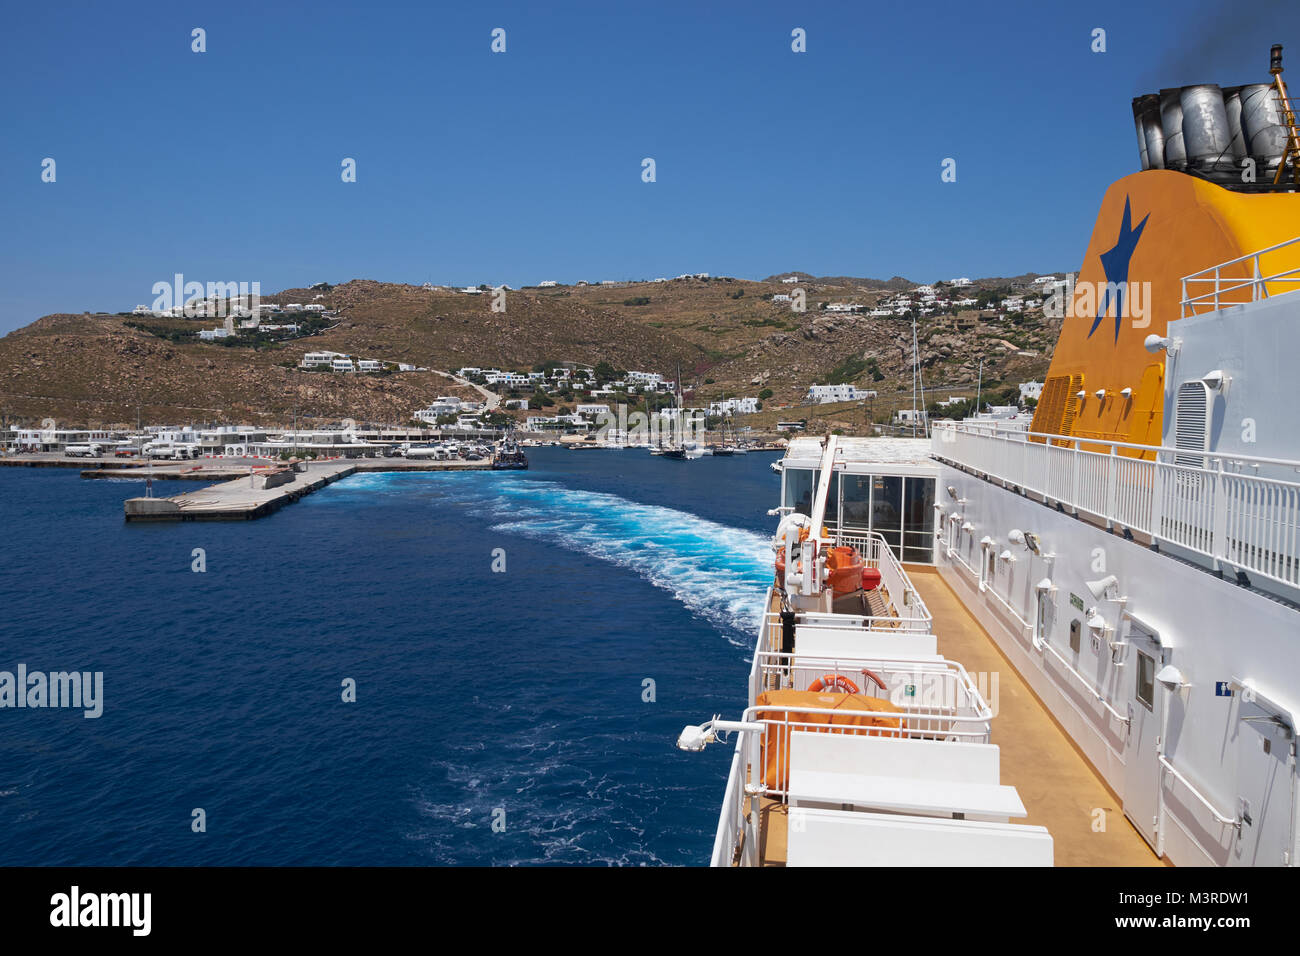 The Blue Star Naxos ferry departing New Port at Mykonos, Cyclades Islands, Aegean Sea, Greece. Stock Photo